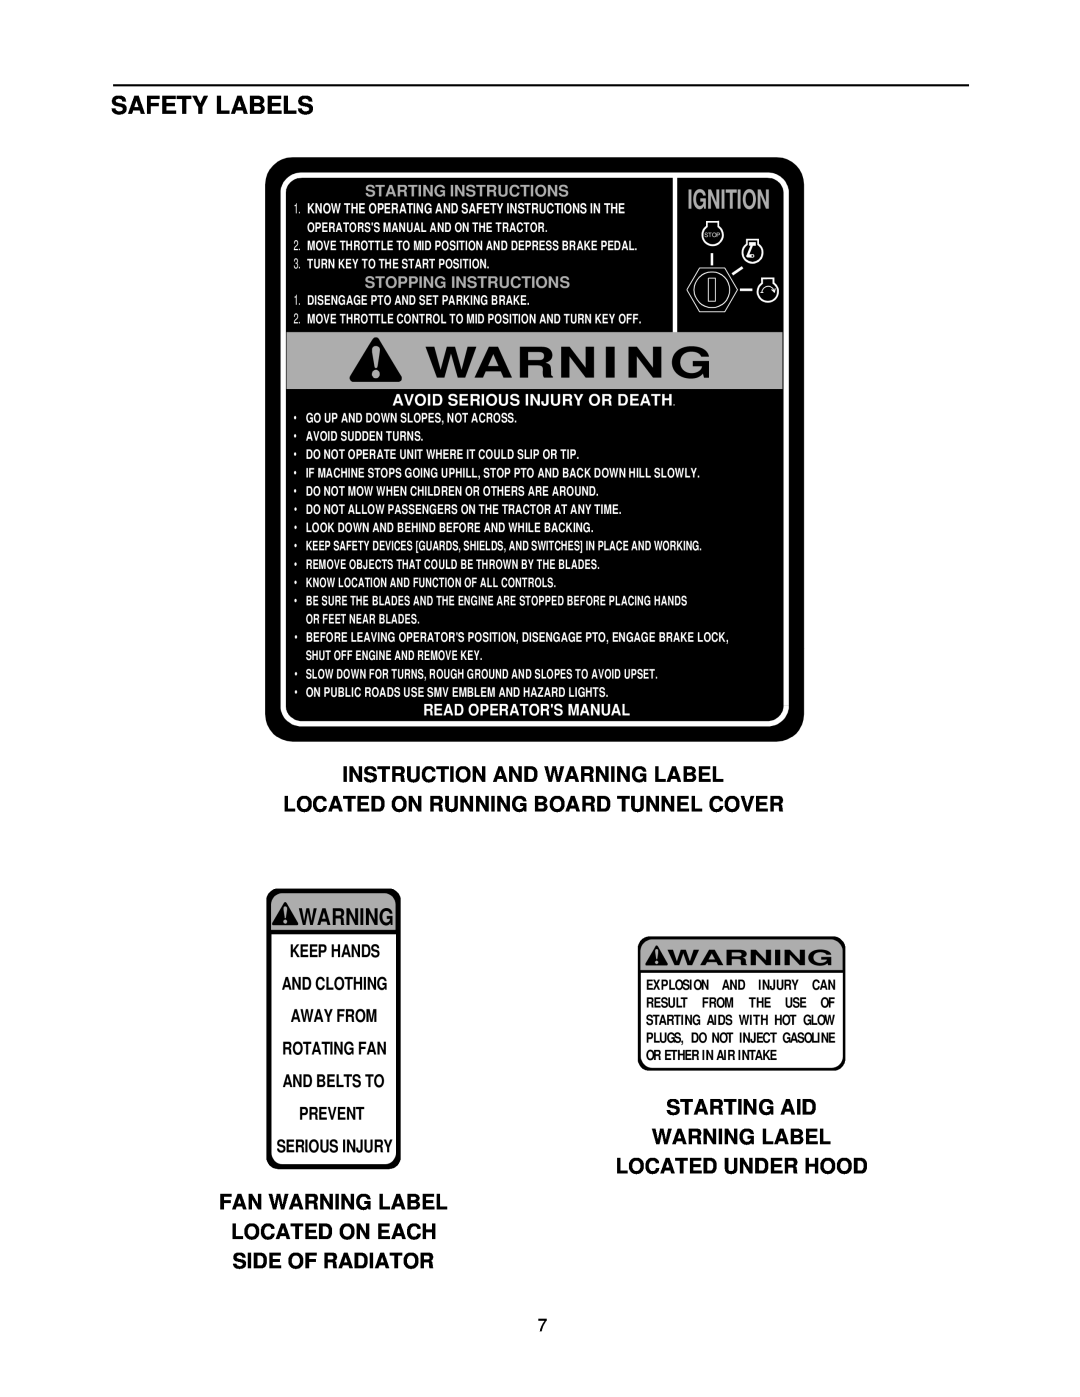 Cub Cadet 7264 Warni Ng, Safety Labels, Instruction And Warning Label Located On Running Board Tunnel Cover, Starting Aid 